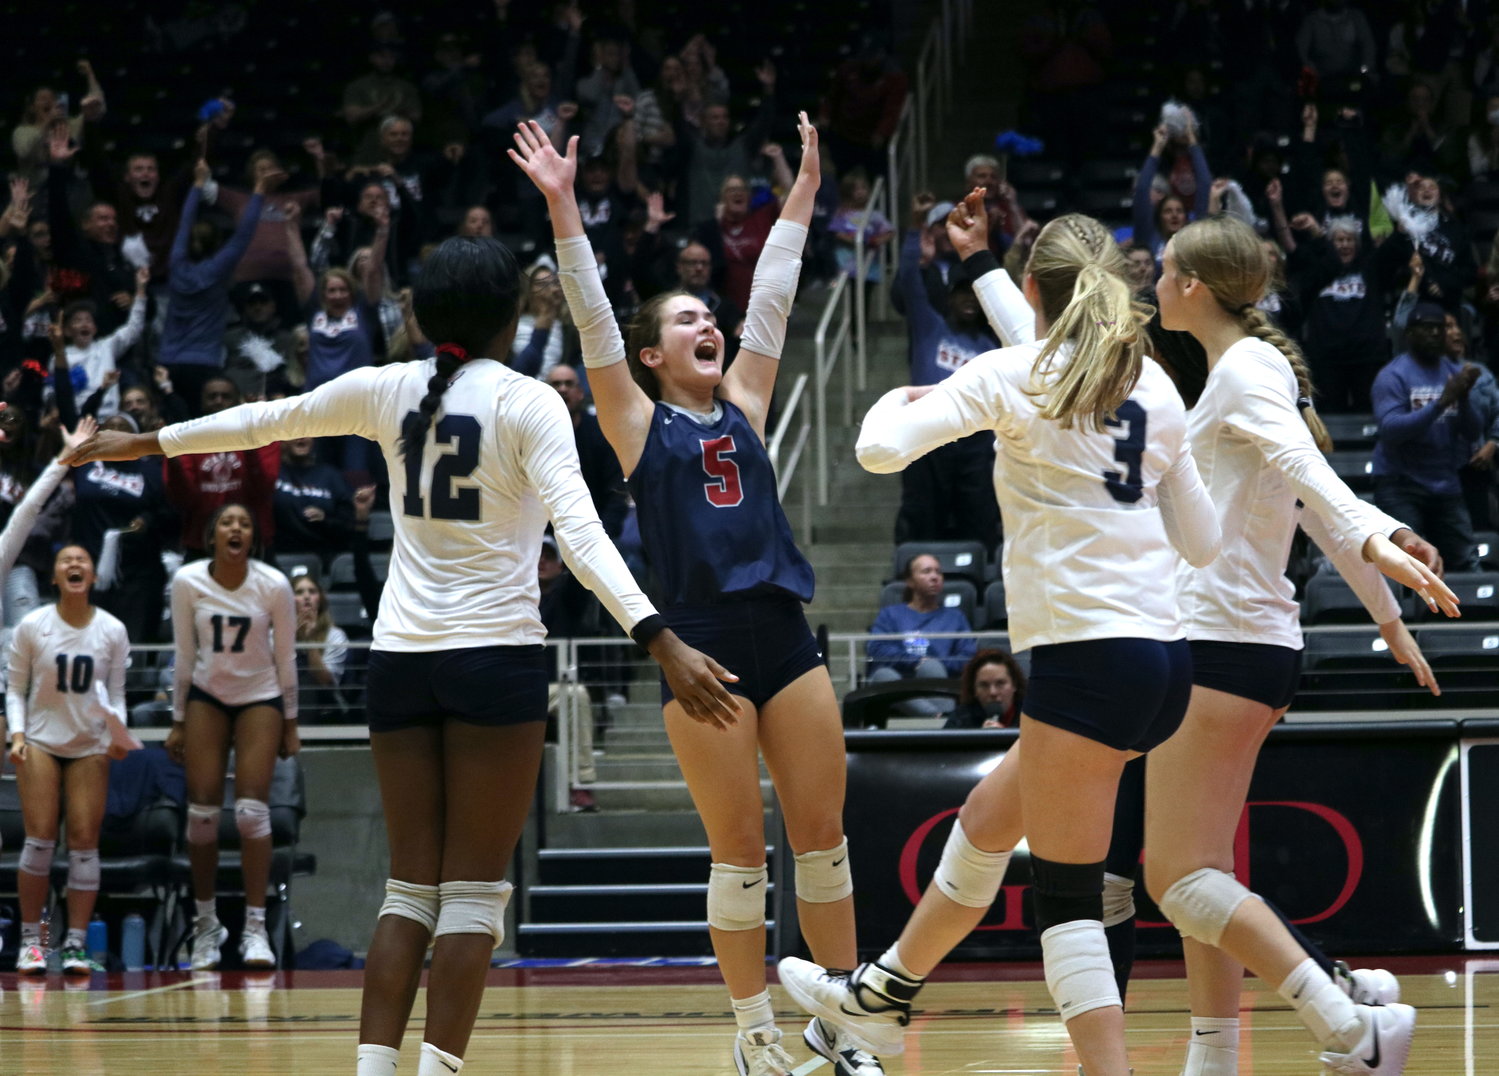 Tompkins celebrates after winning the first set during Friday's Class 6A State Semifinal between Tompkins and Keller on Friday at the Curtis Culwell Center in Garland.